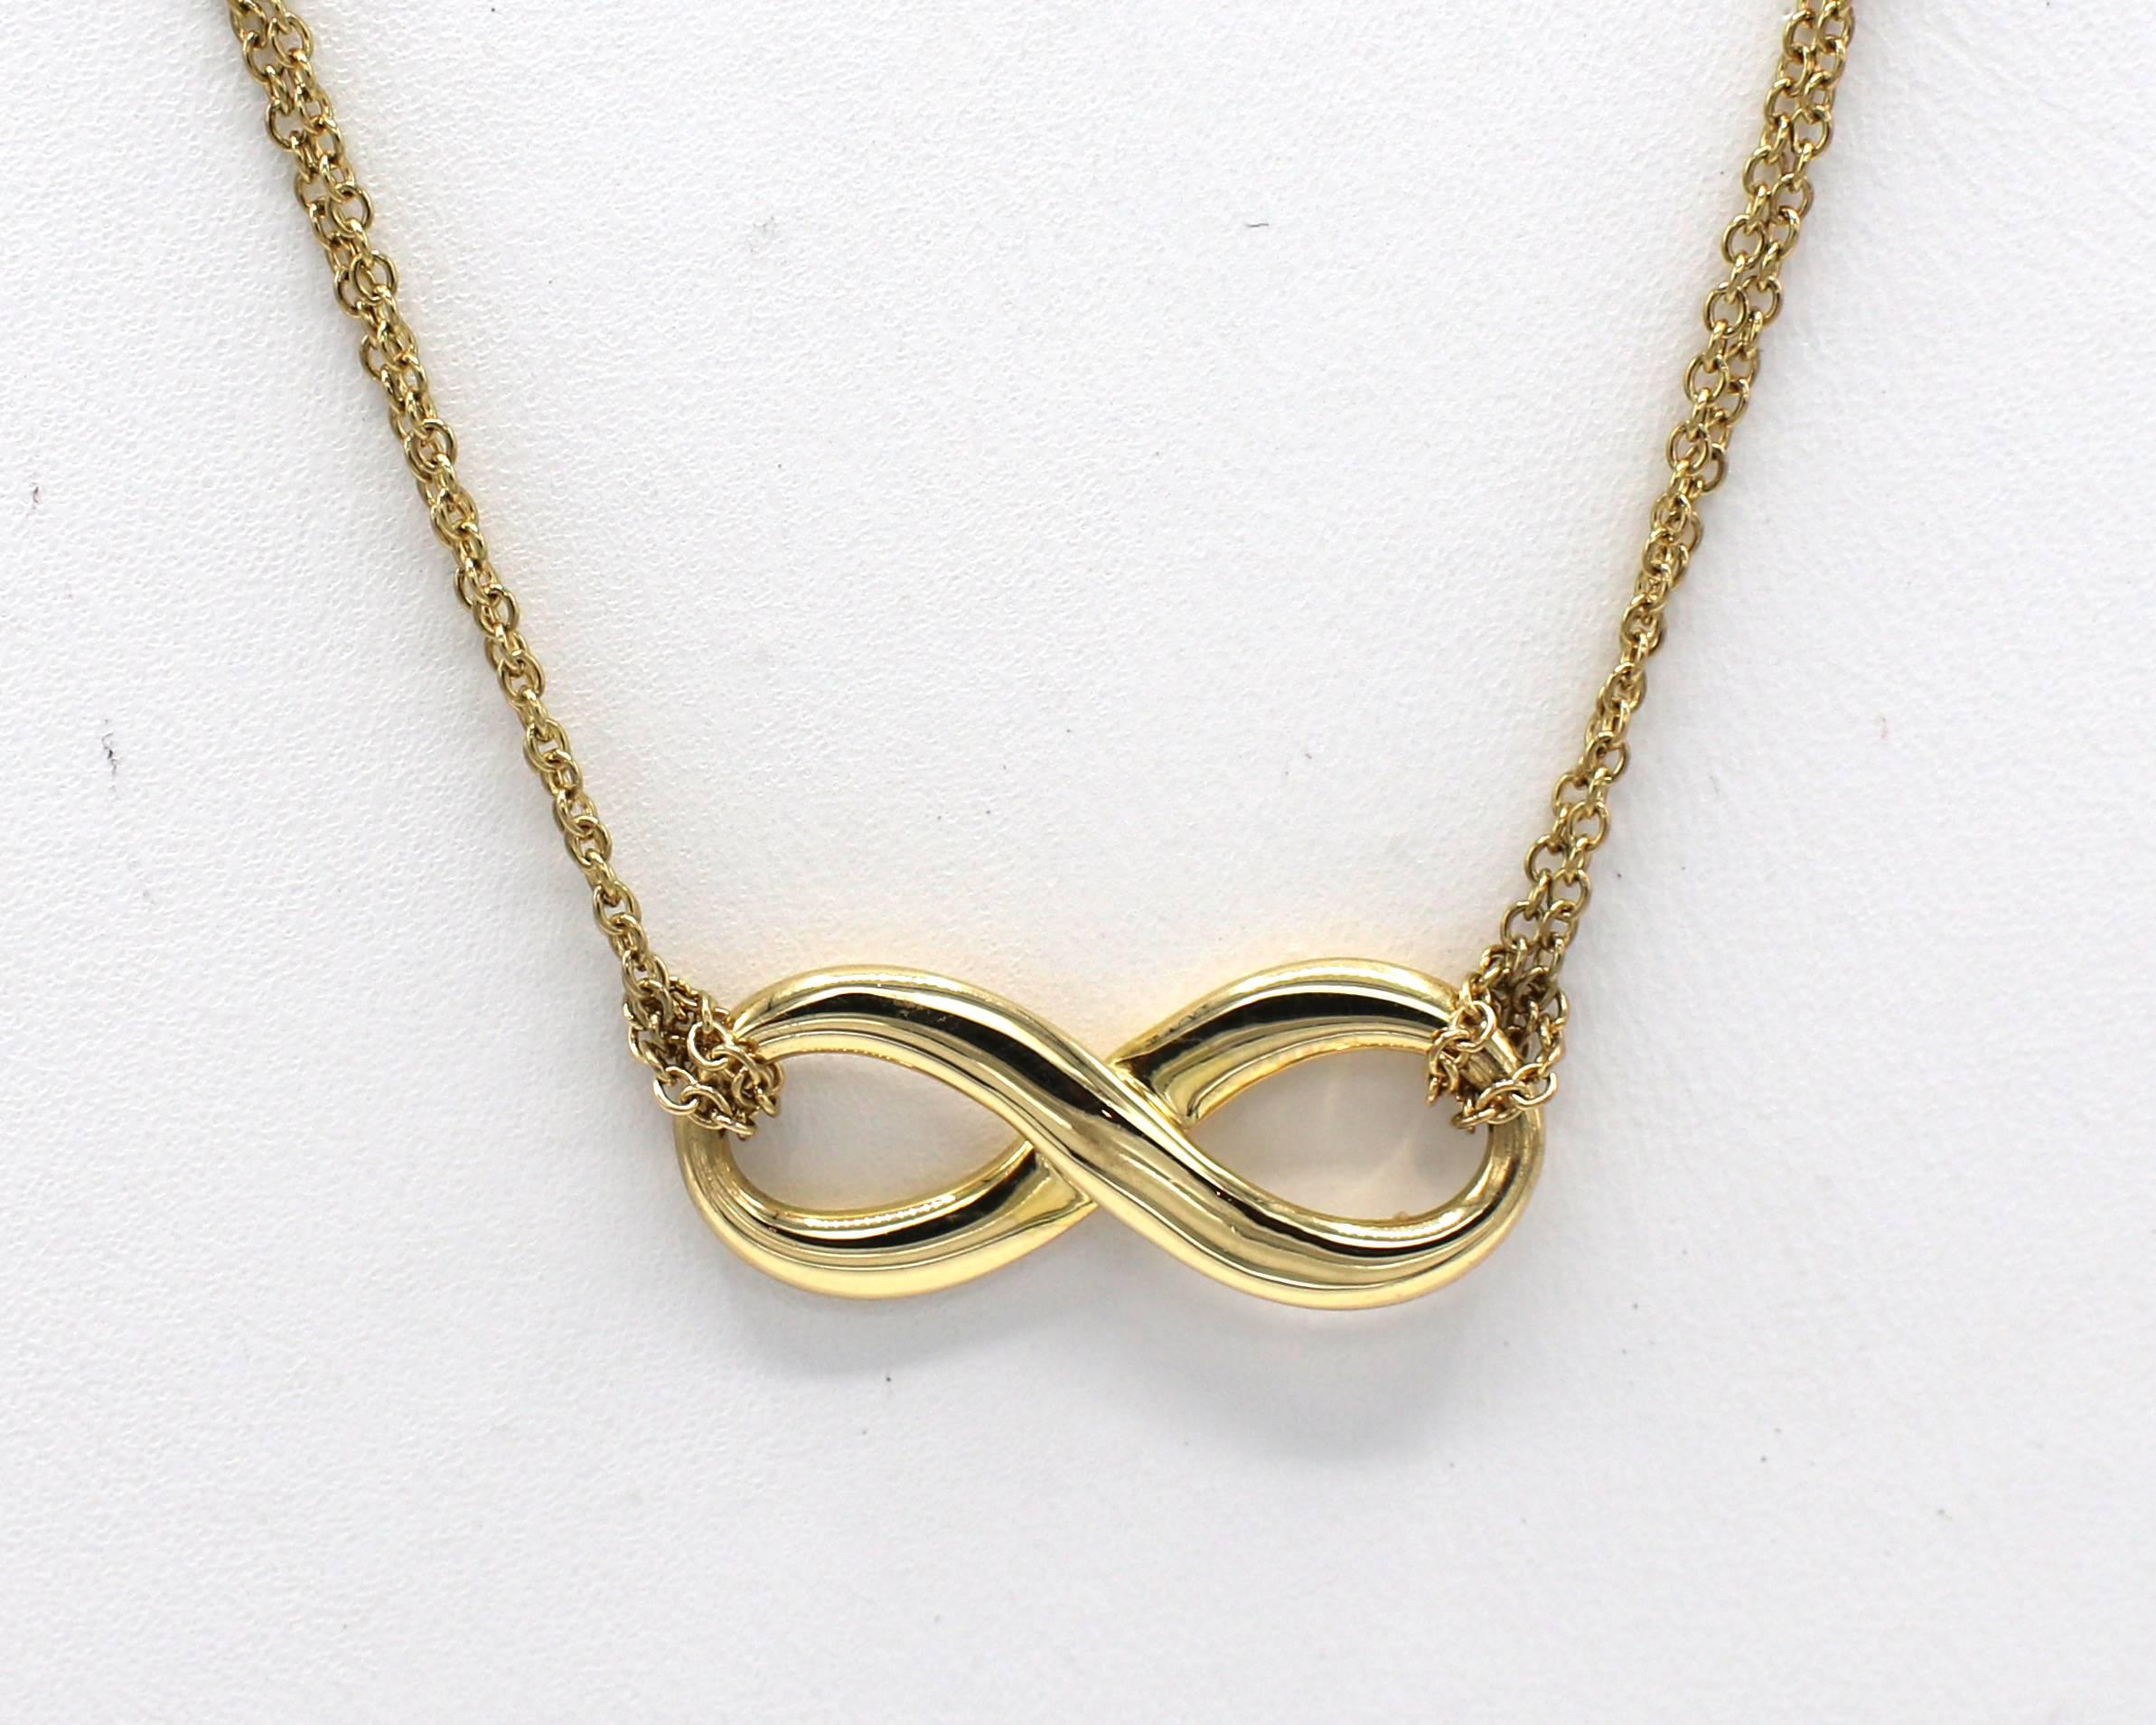 Tiffany & Co. 18 Karat Yellow Gold Double Chain Infinity Pendant Necklace 
Metal: 18 karat yellow gold
Weight: 4.41 grams
Length: 16 inches
Pendant: 20 x 8.5mm
